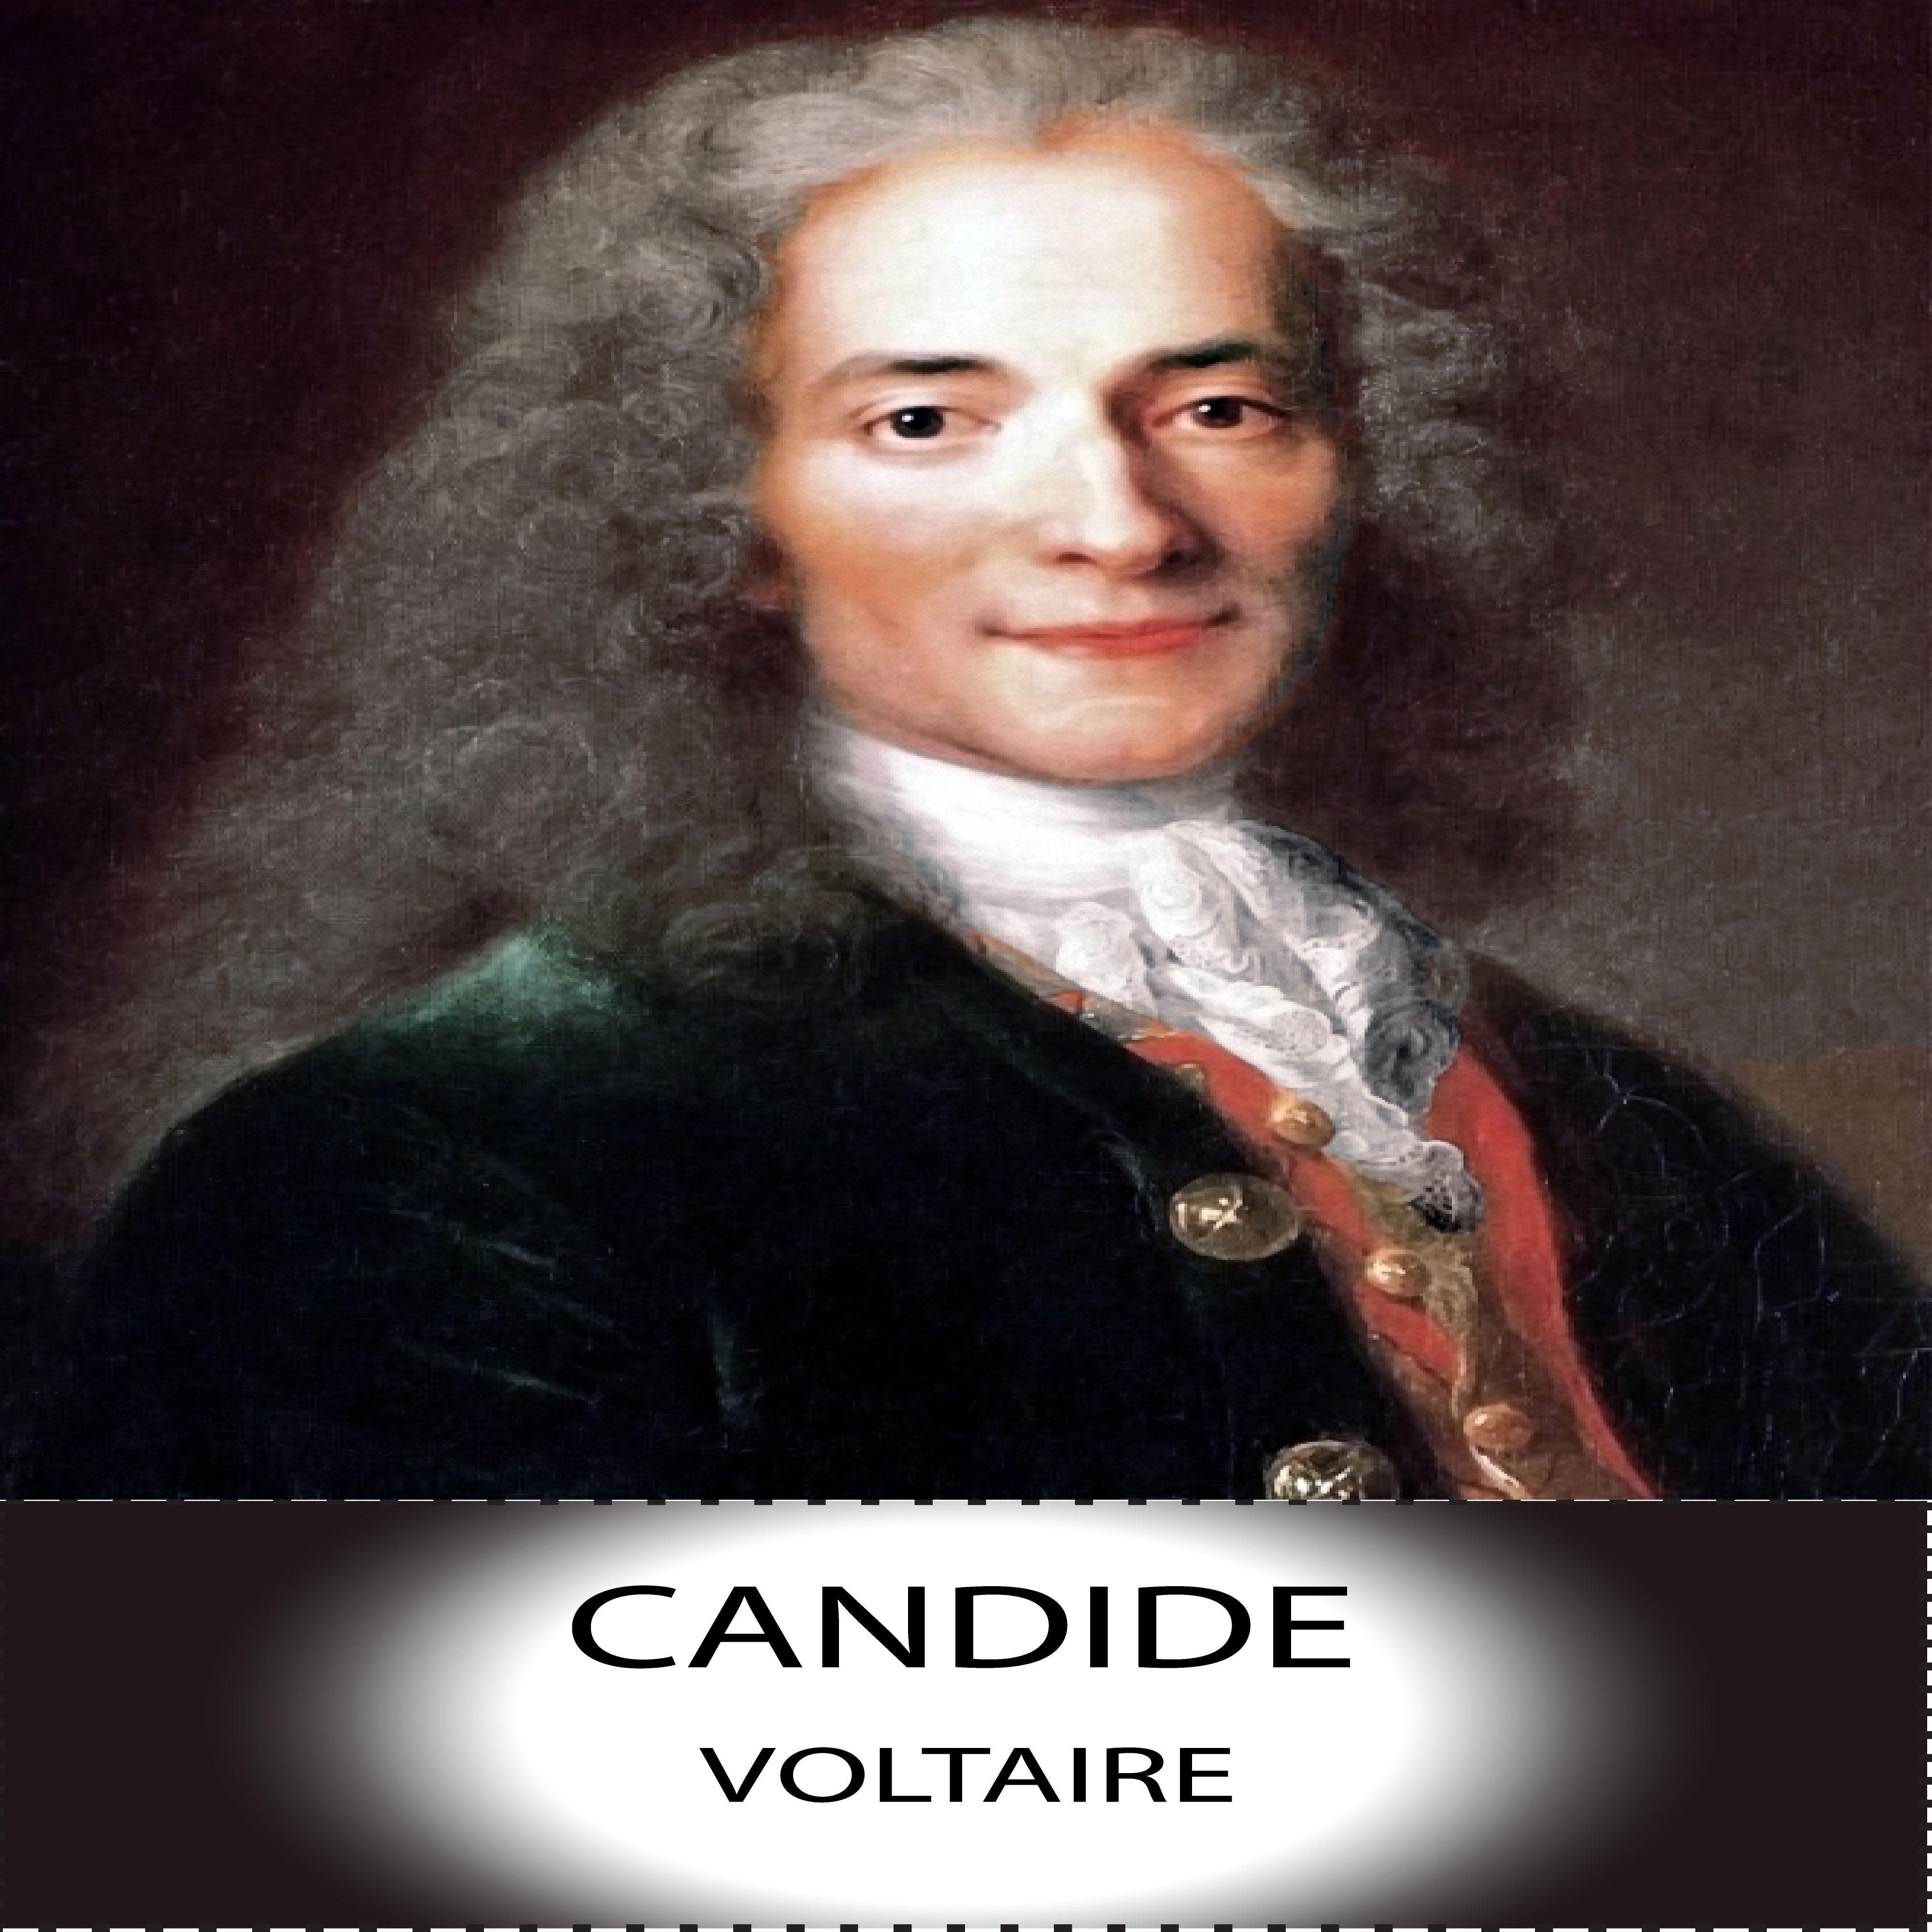 Voltaire: Candide, Chapter 21